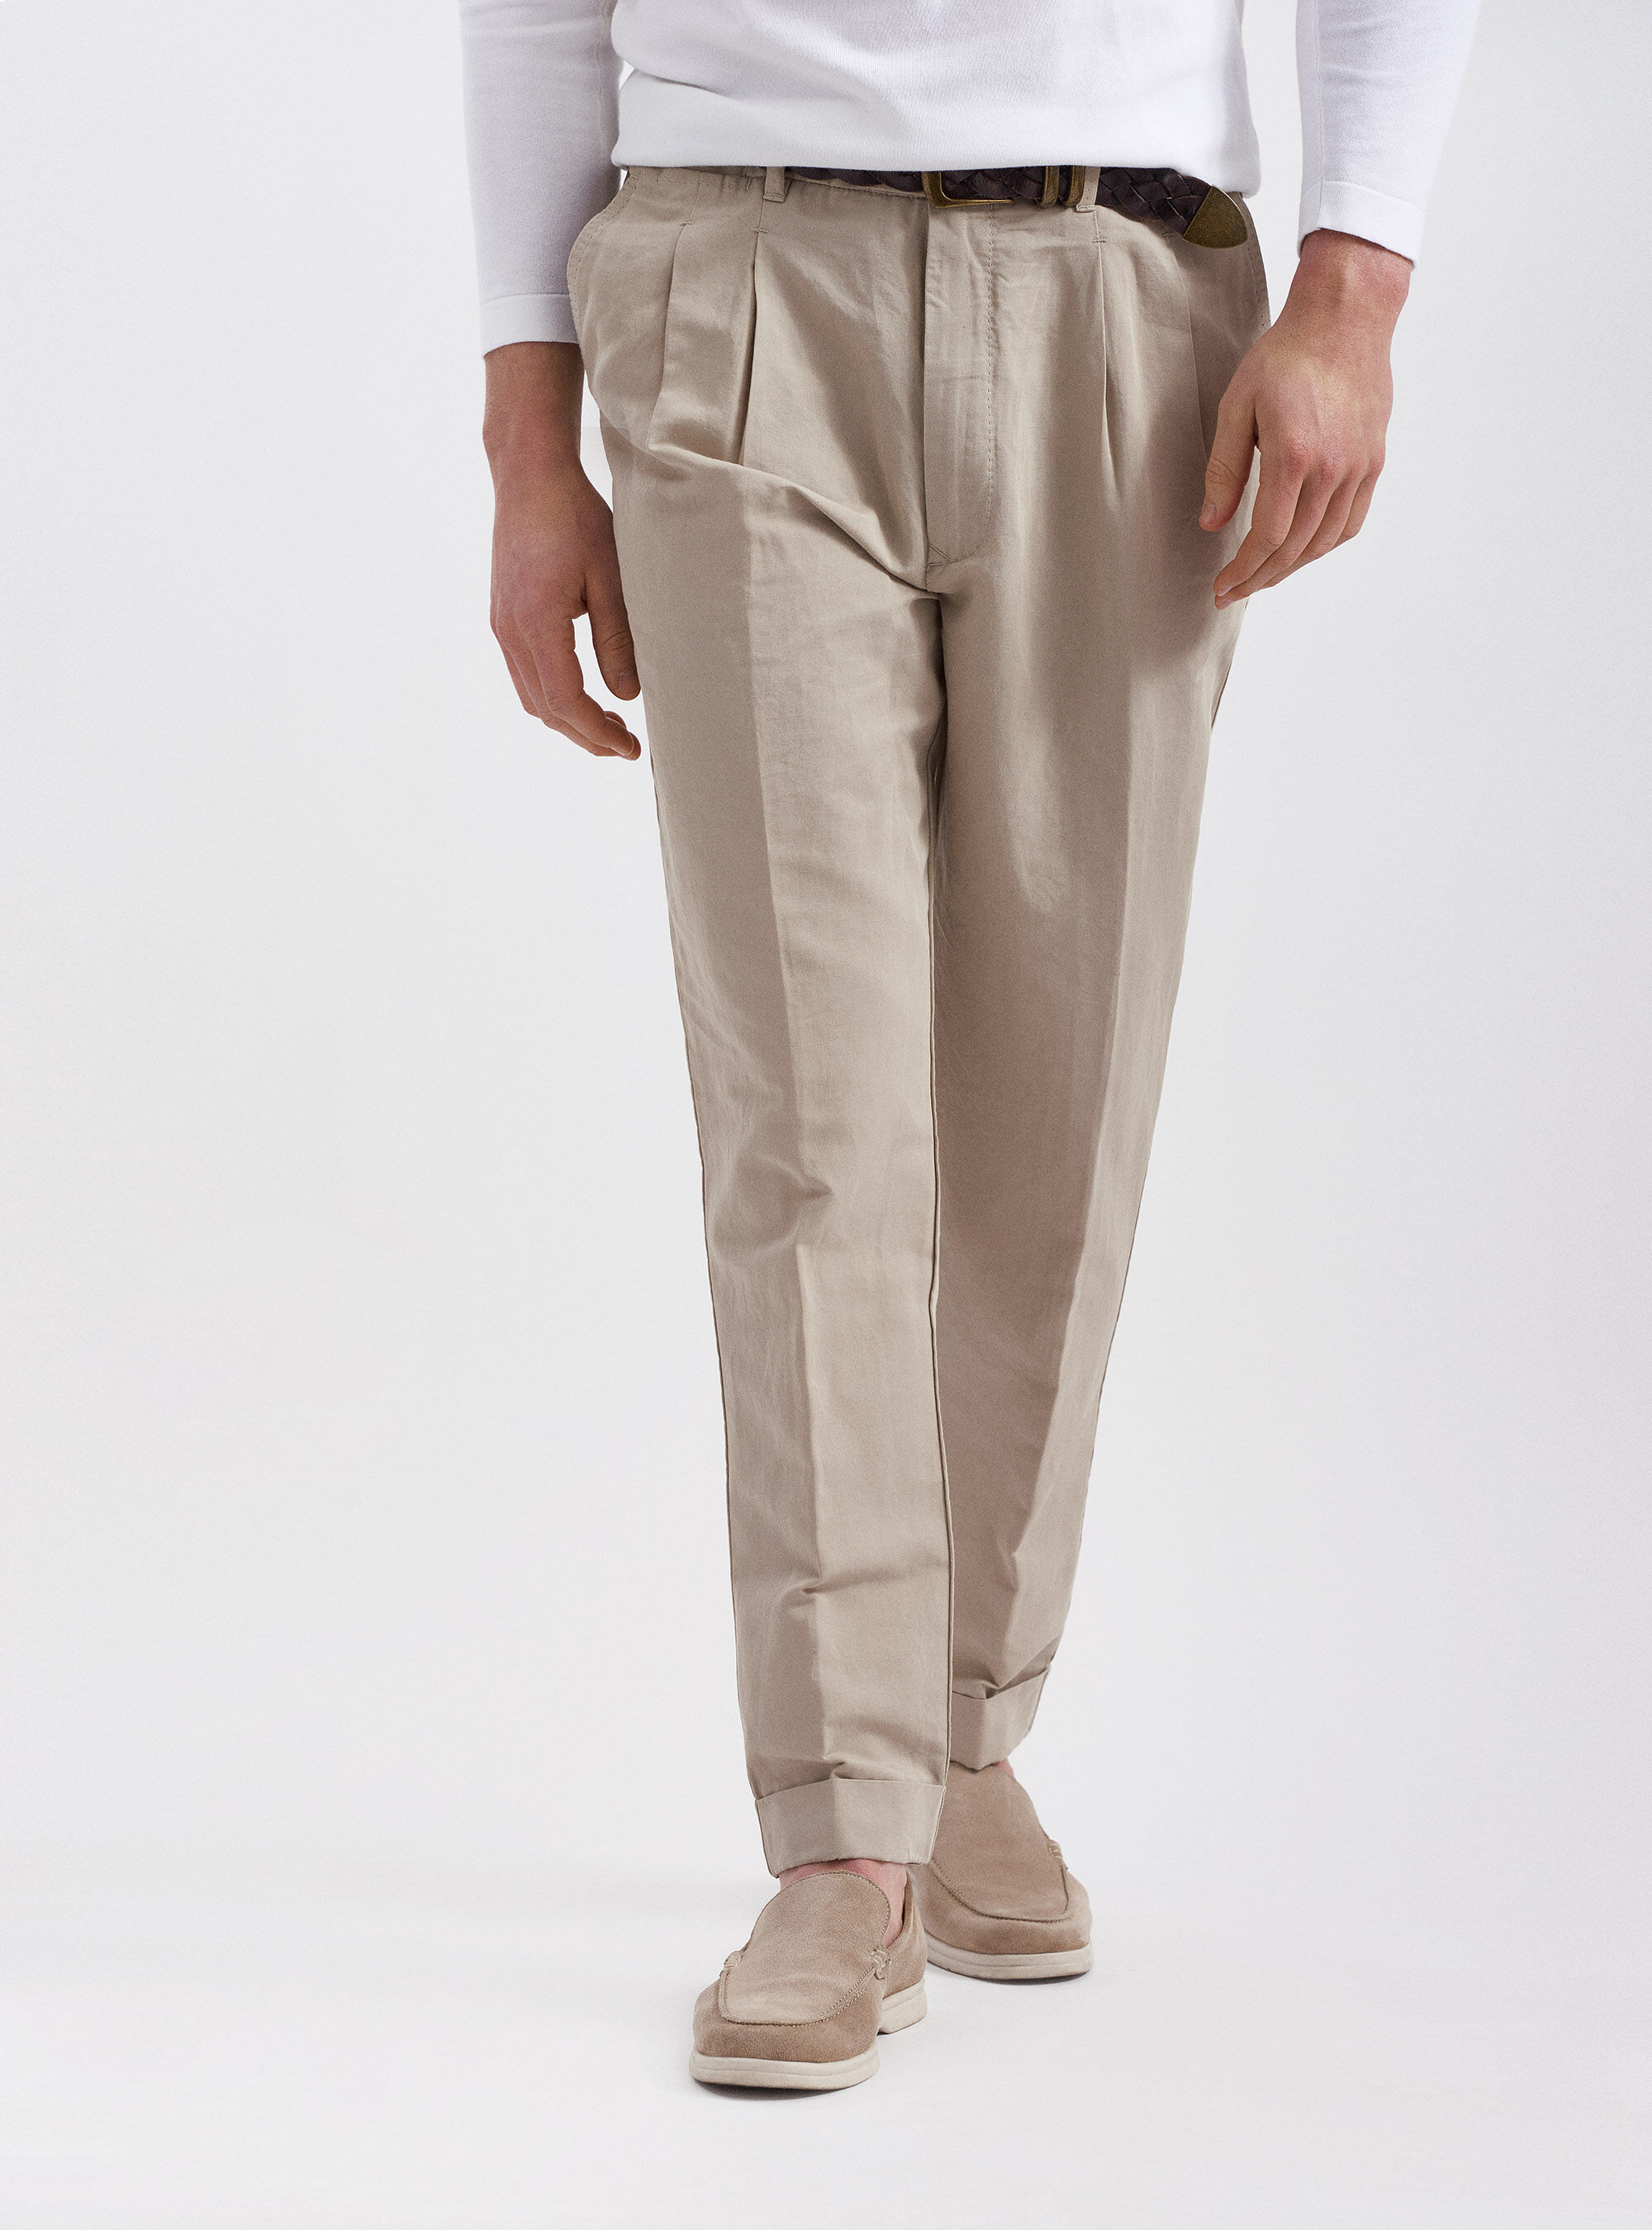 Cotton Office Wear Mens Pleated Trousers